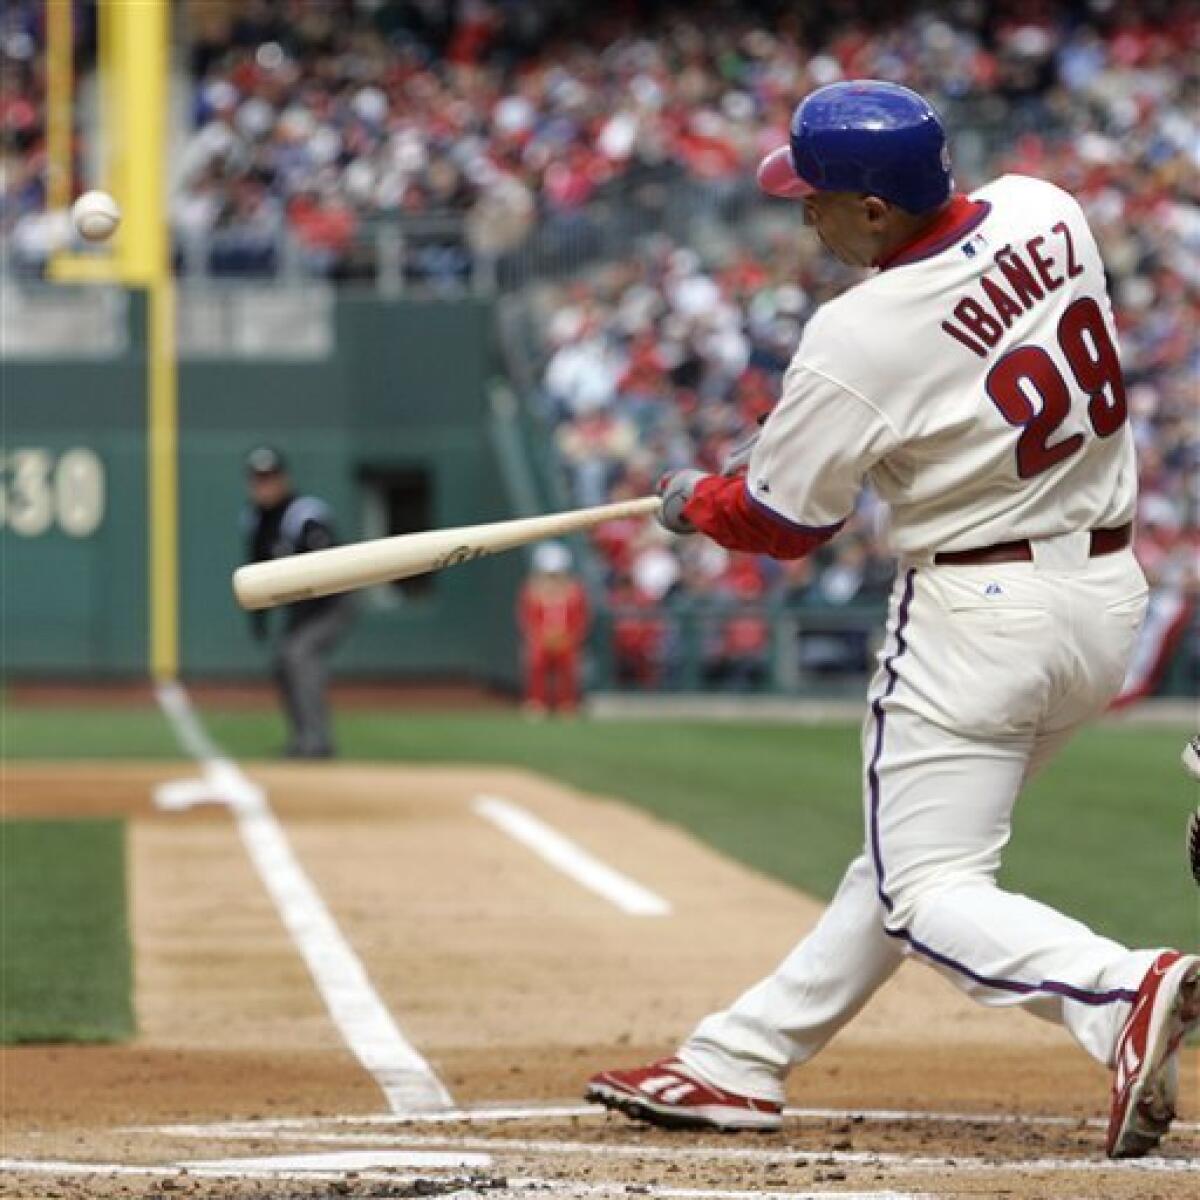 2-time World Series champ Shane Victorino retires after 12 seasons